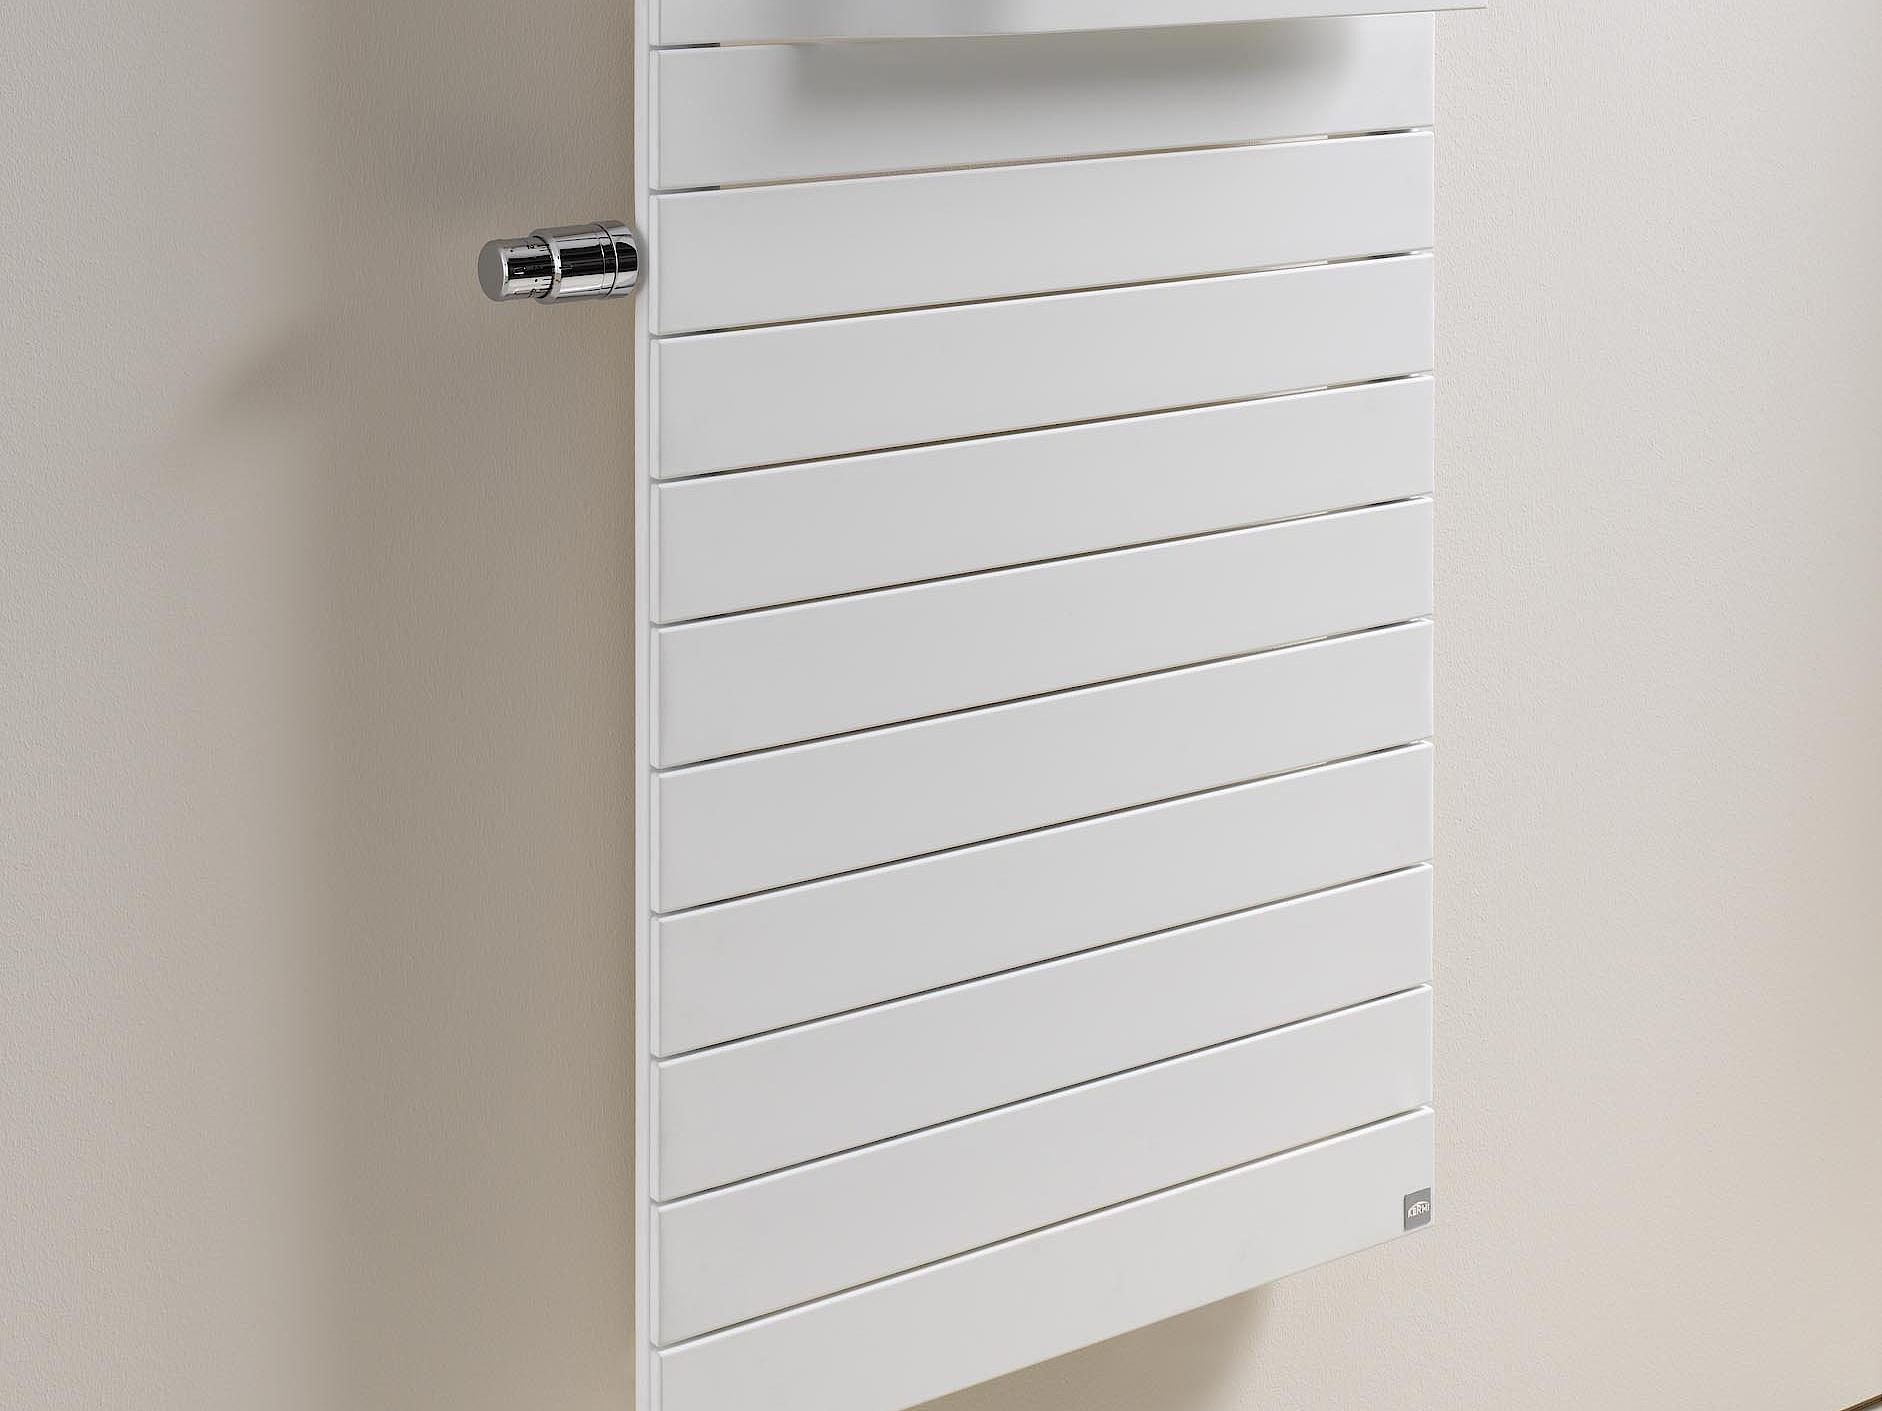 Kermi Tabeo-V design and bathroom radiators with thermostat attached at a user-friendly height.